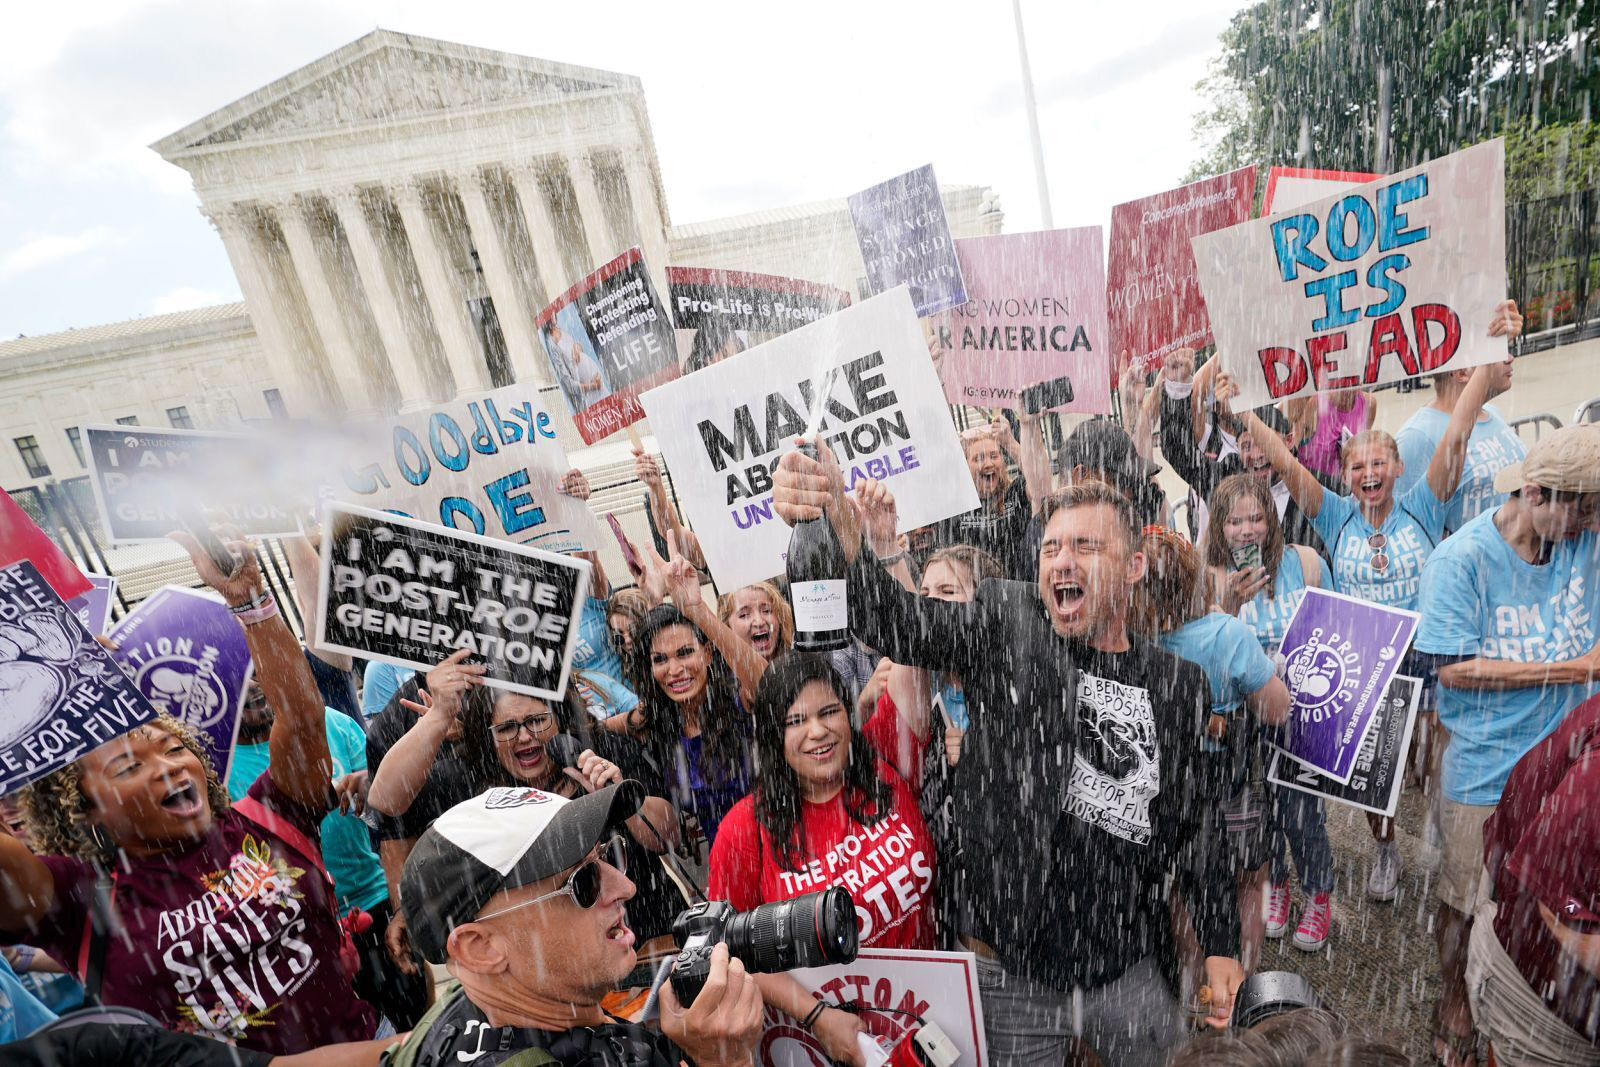 Anti-abortion demonstrators celebrate with champagne in front of the Supreme Court immediately following the decision to overturn Roe vs Wade.